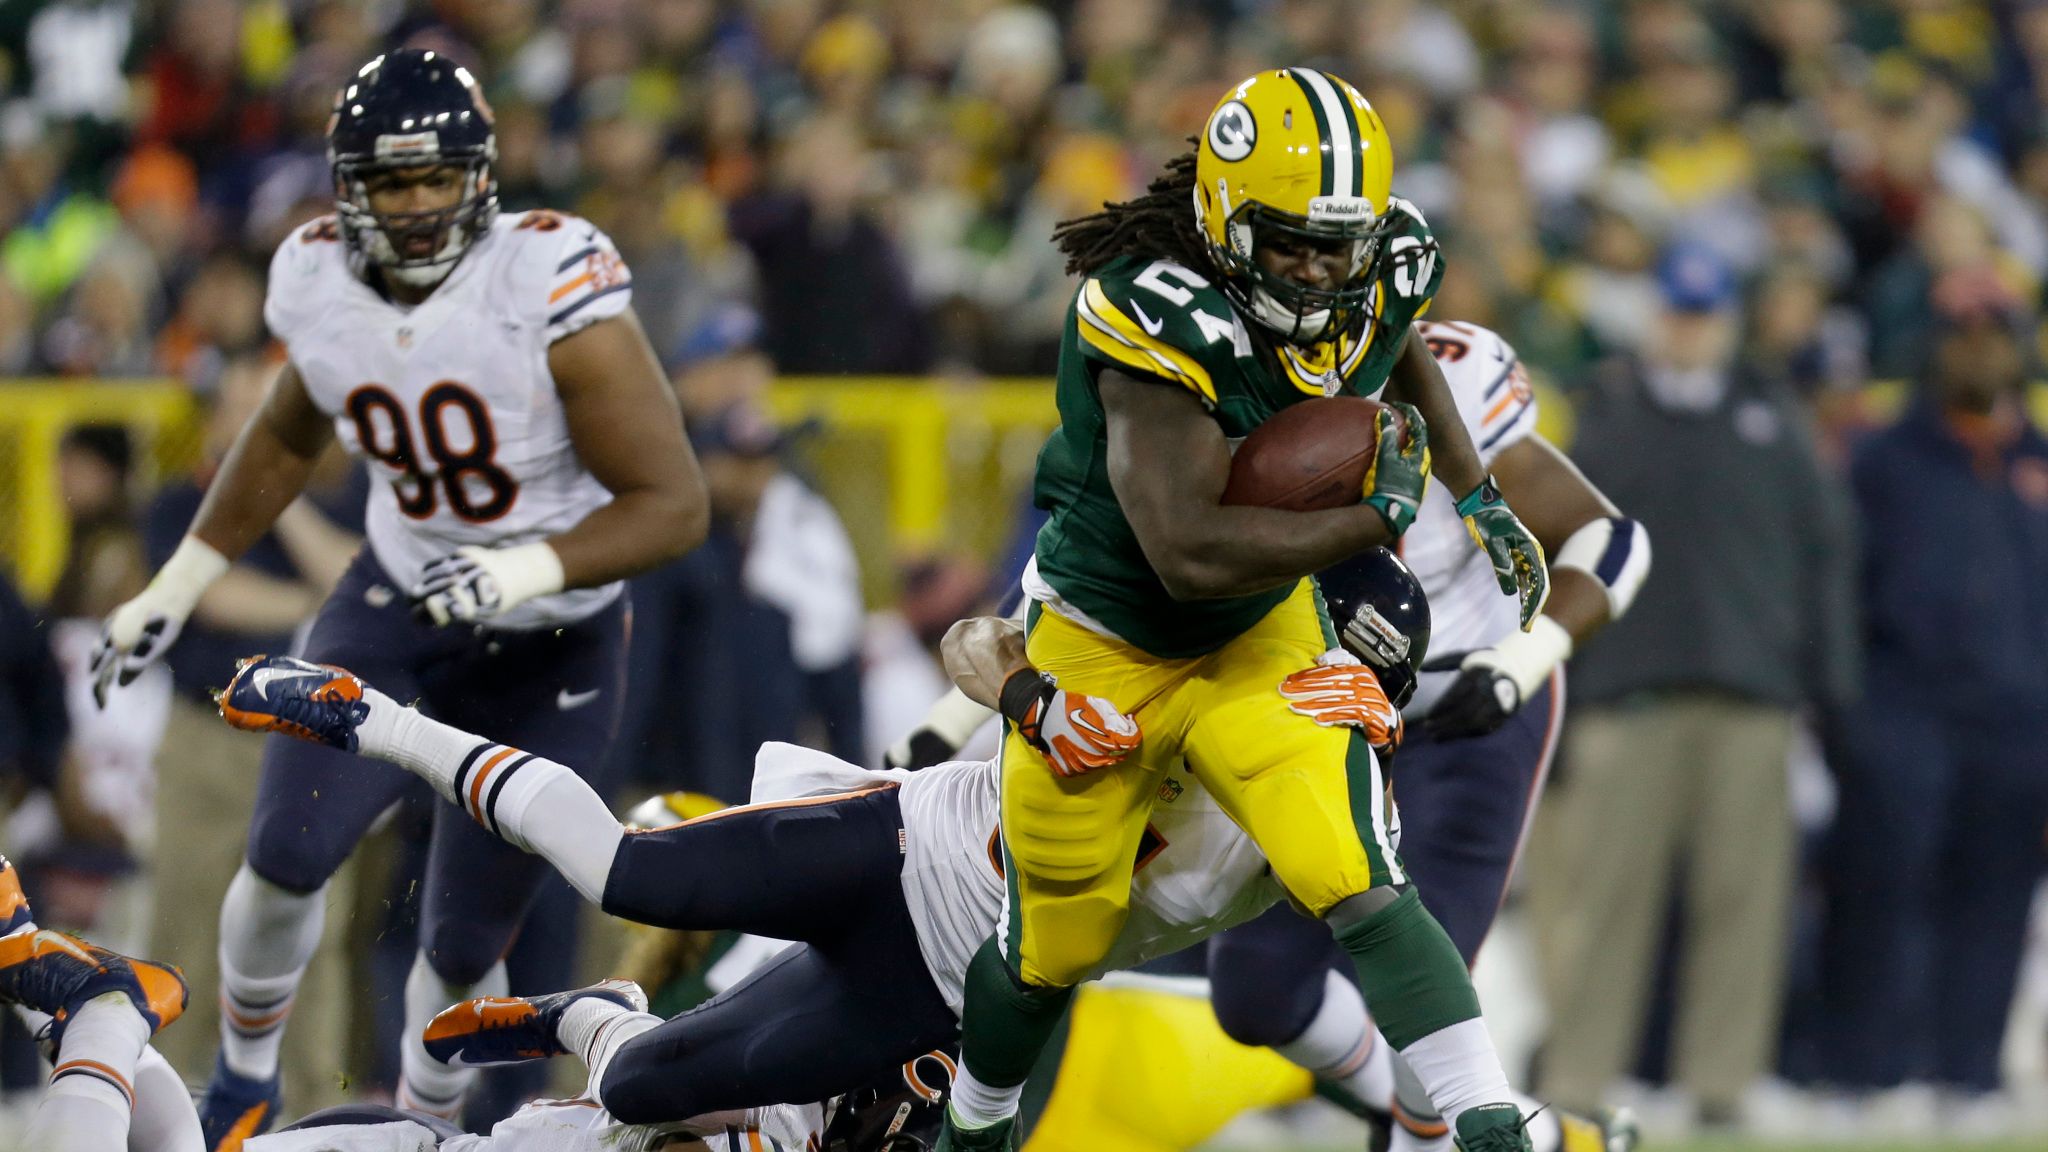 Eddie Lacy was a BEAST #nfl #football #nflfootball #packers